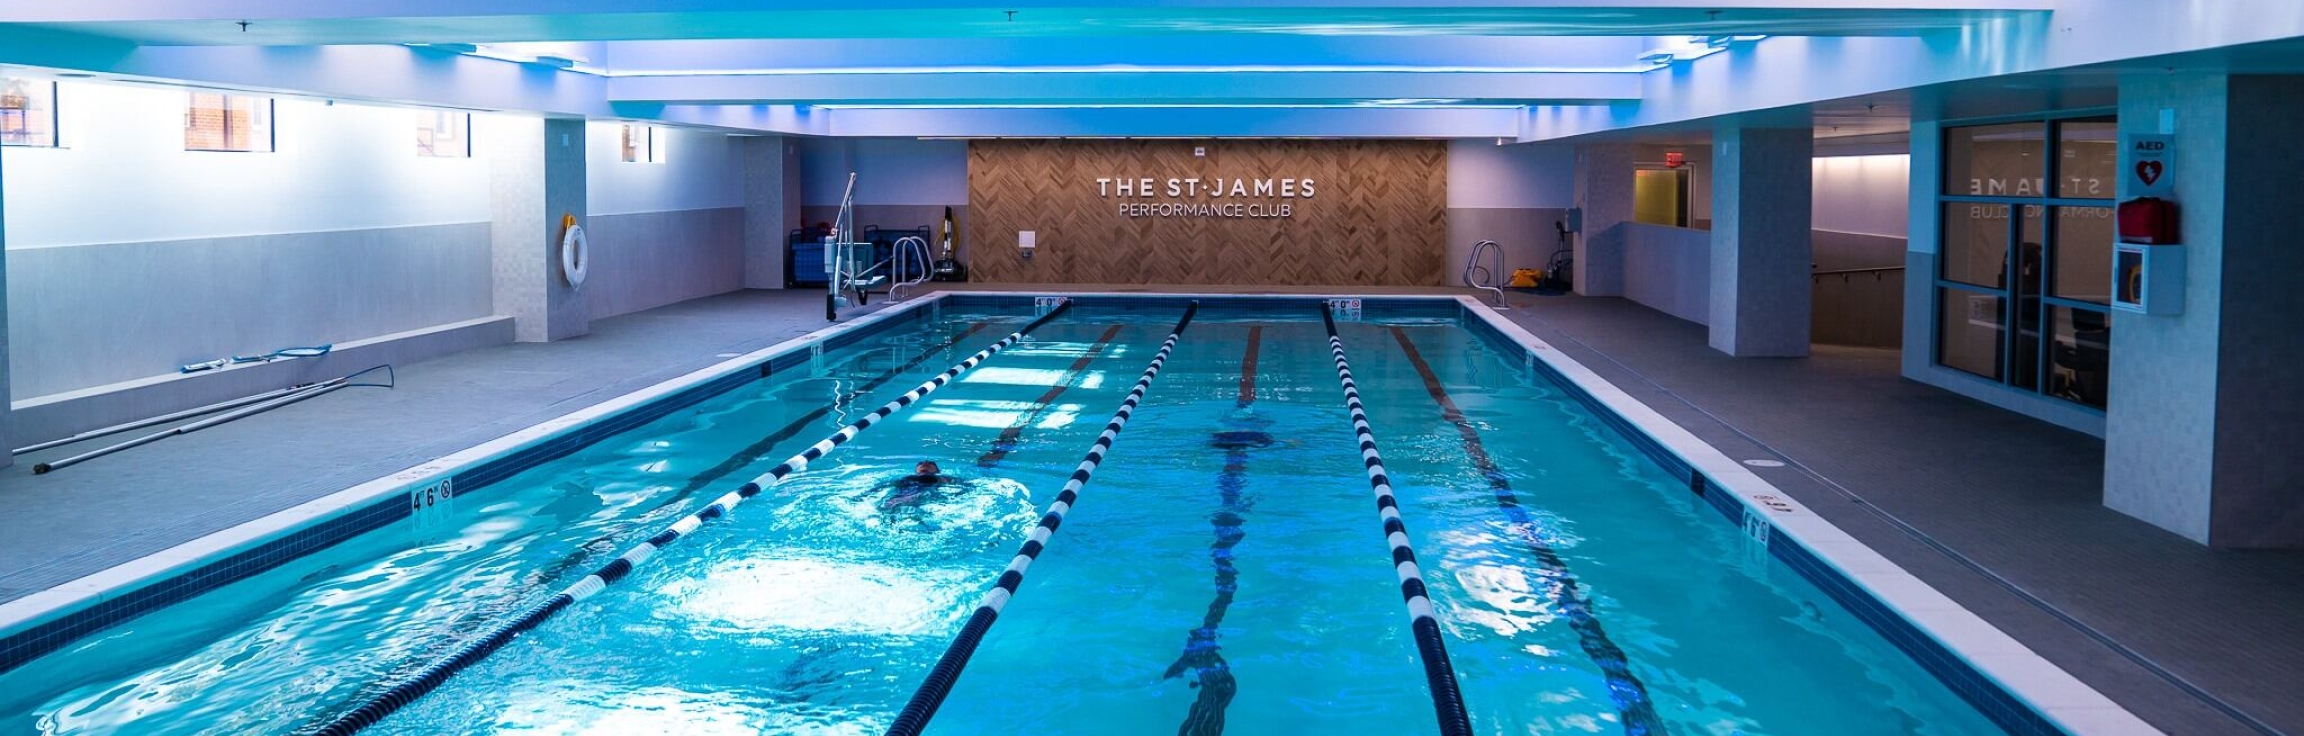 Gym, Health & Fitness Center in Bethesda, MD | The St. James